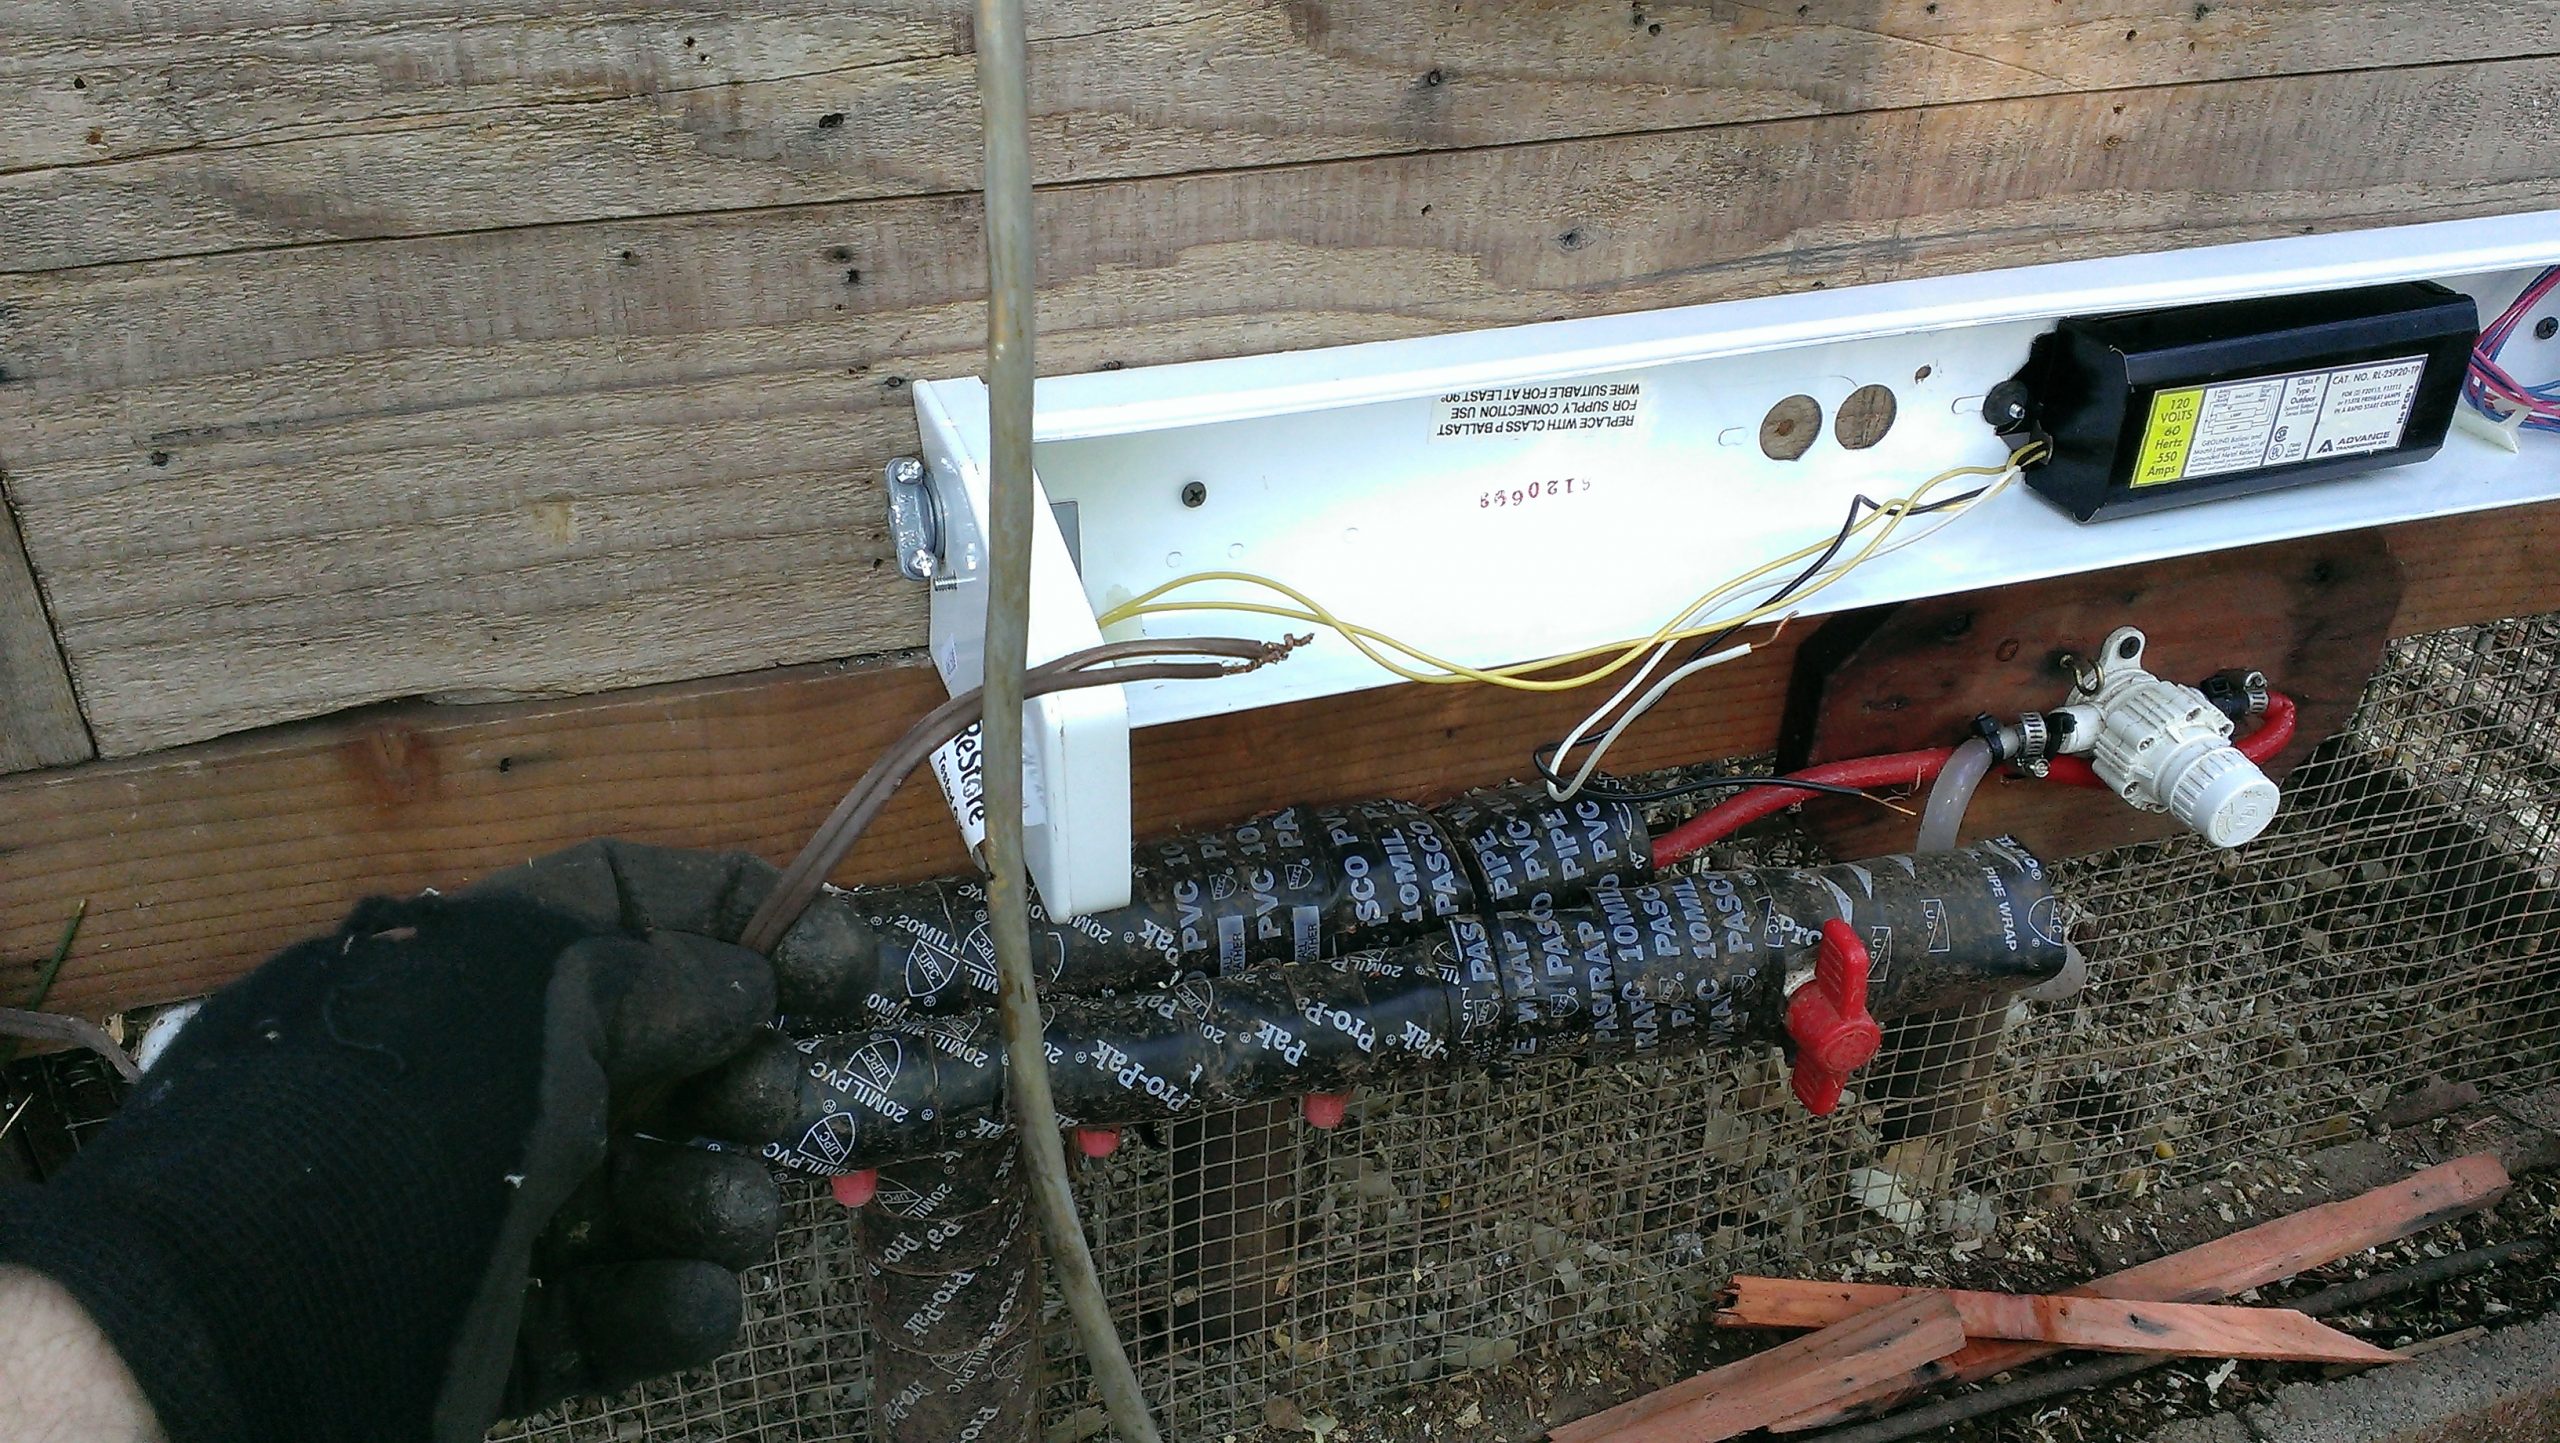 Wiring Chicken Coop Heater (shop light with cover off) - Exterior Pipe Protection (mounted under stairs and above wrapped pipe)